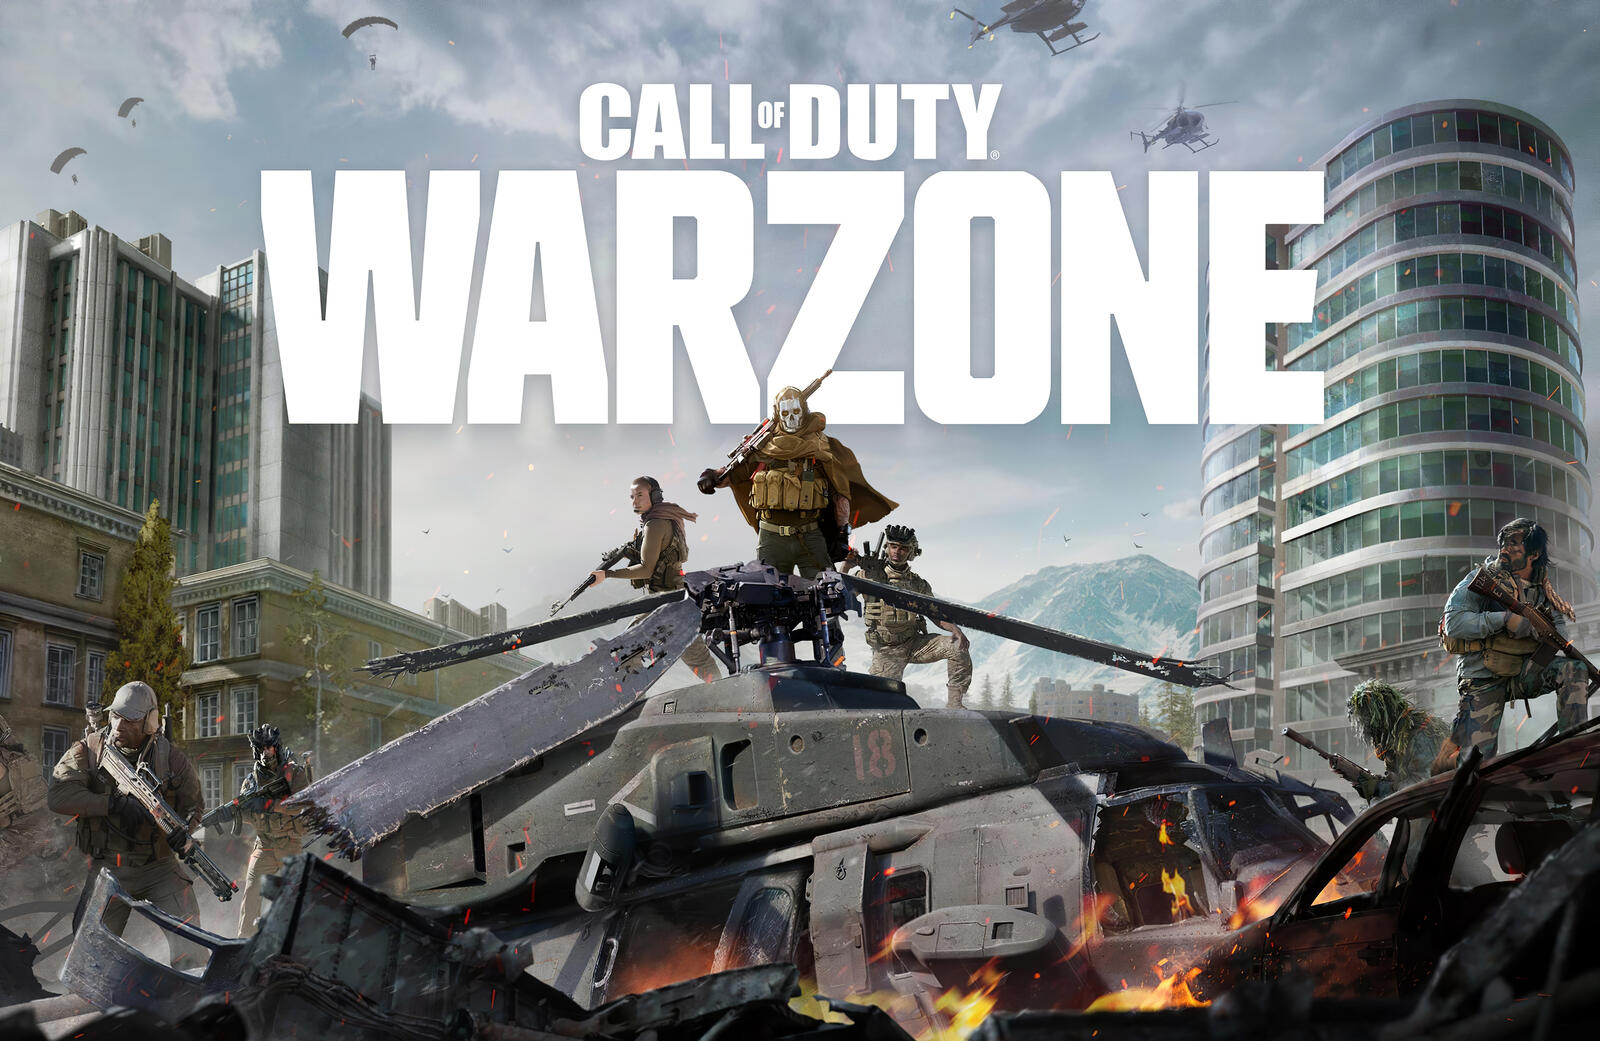 Wallpapers Call Of Duty: Warzone Call Of Duty games on the desktop